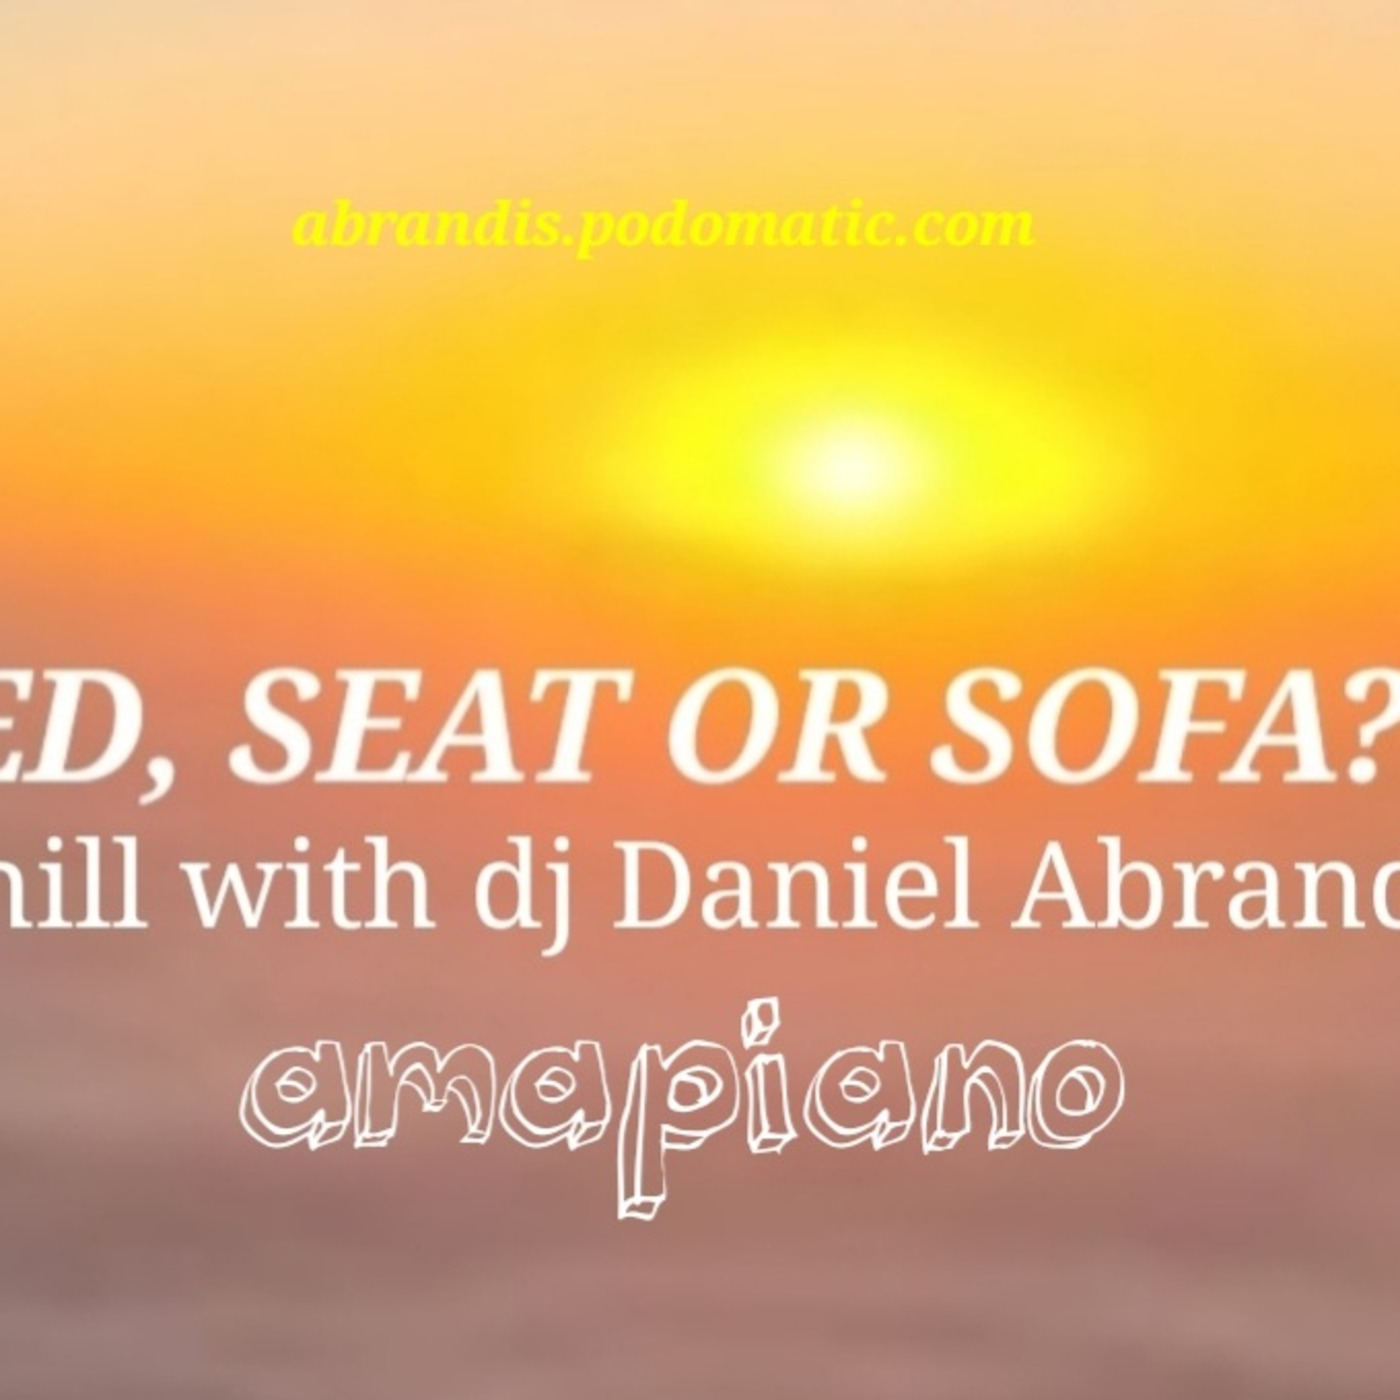 Episode 33: Bed, Seat or Sofa? X chill with dj Daniel Abrandis